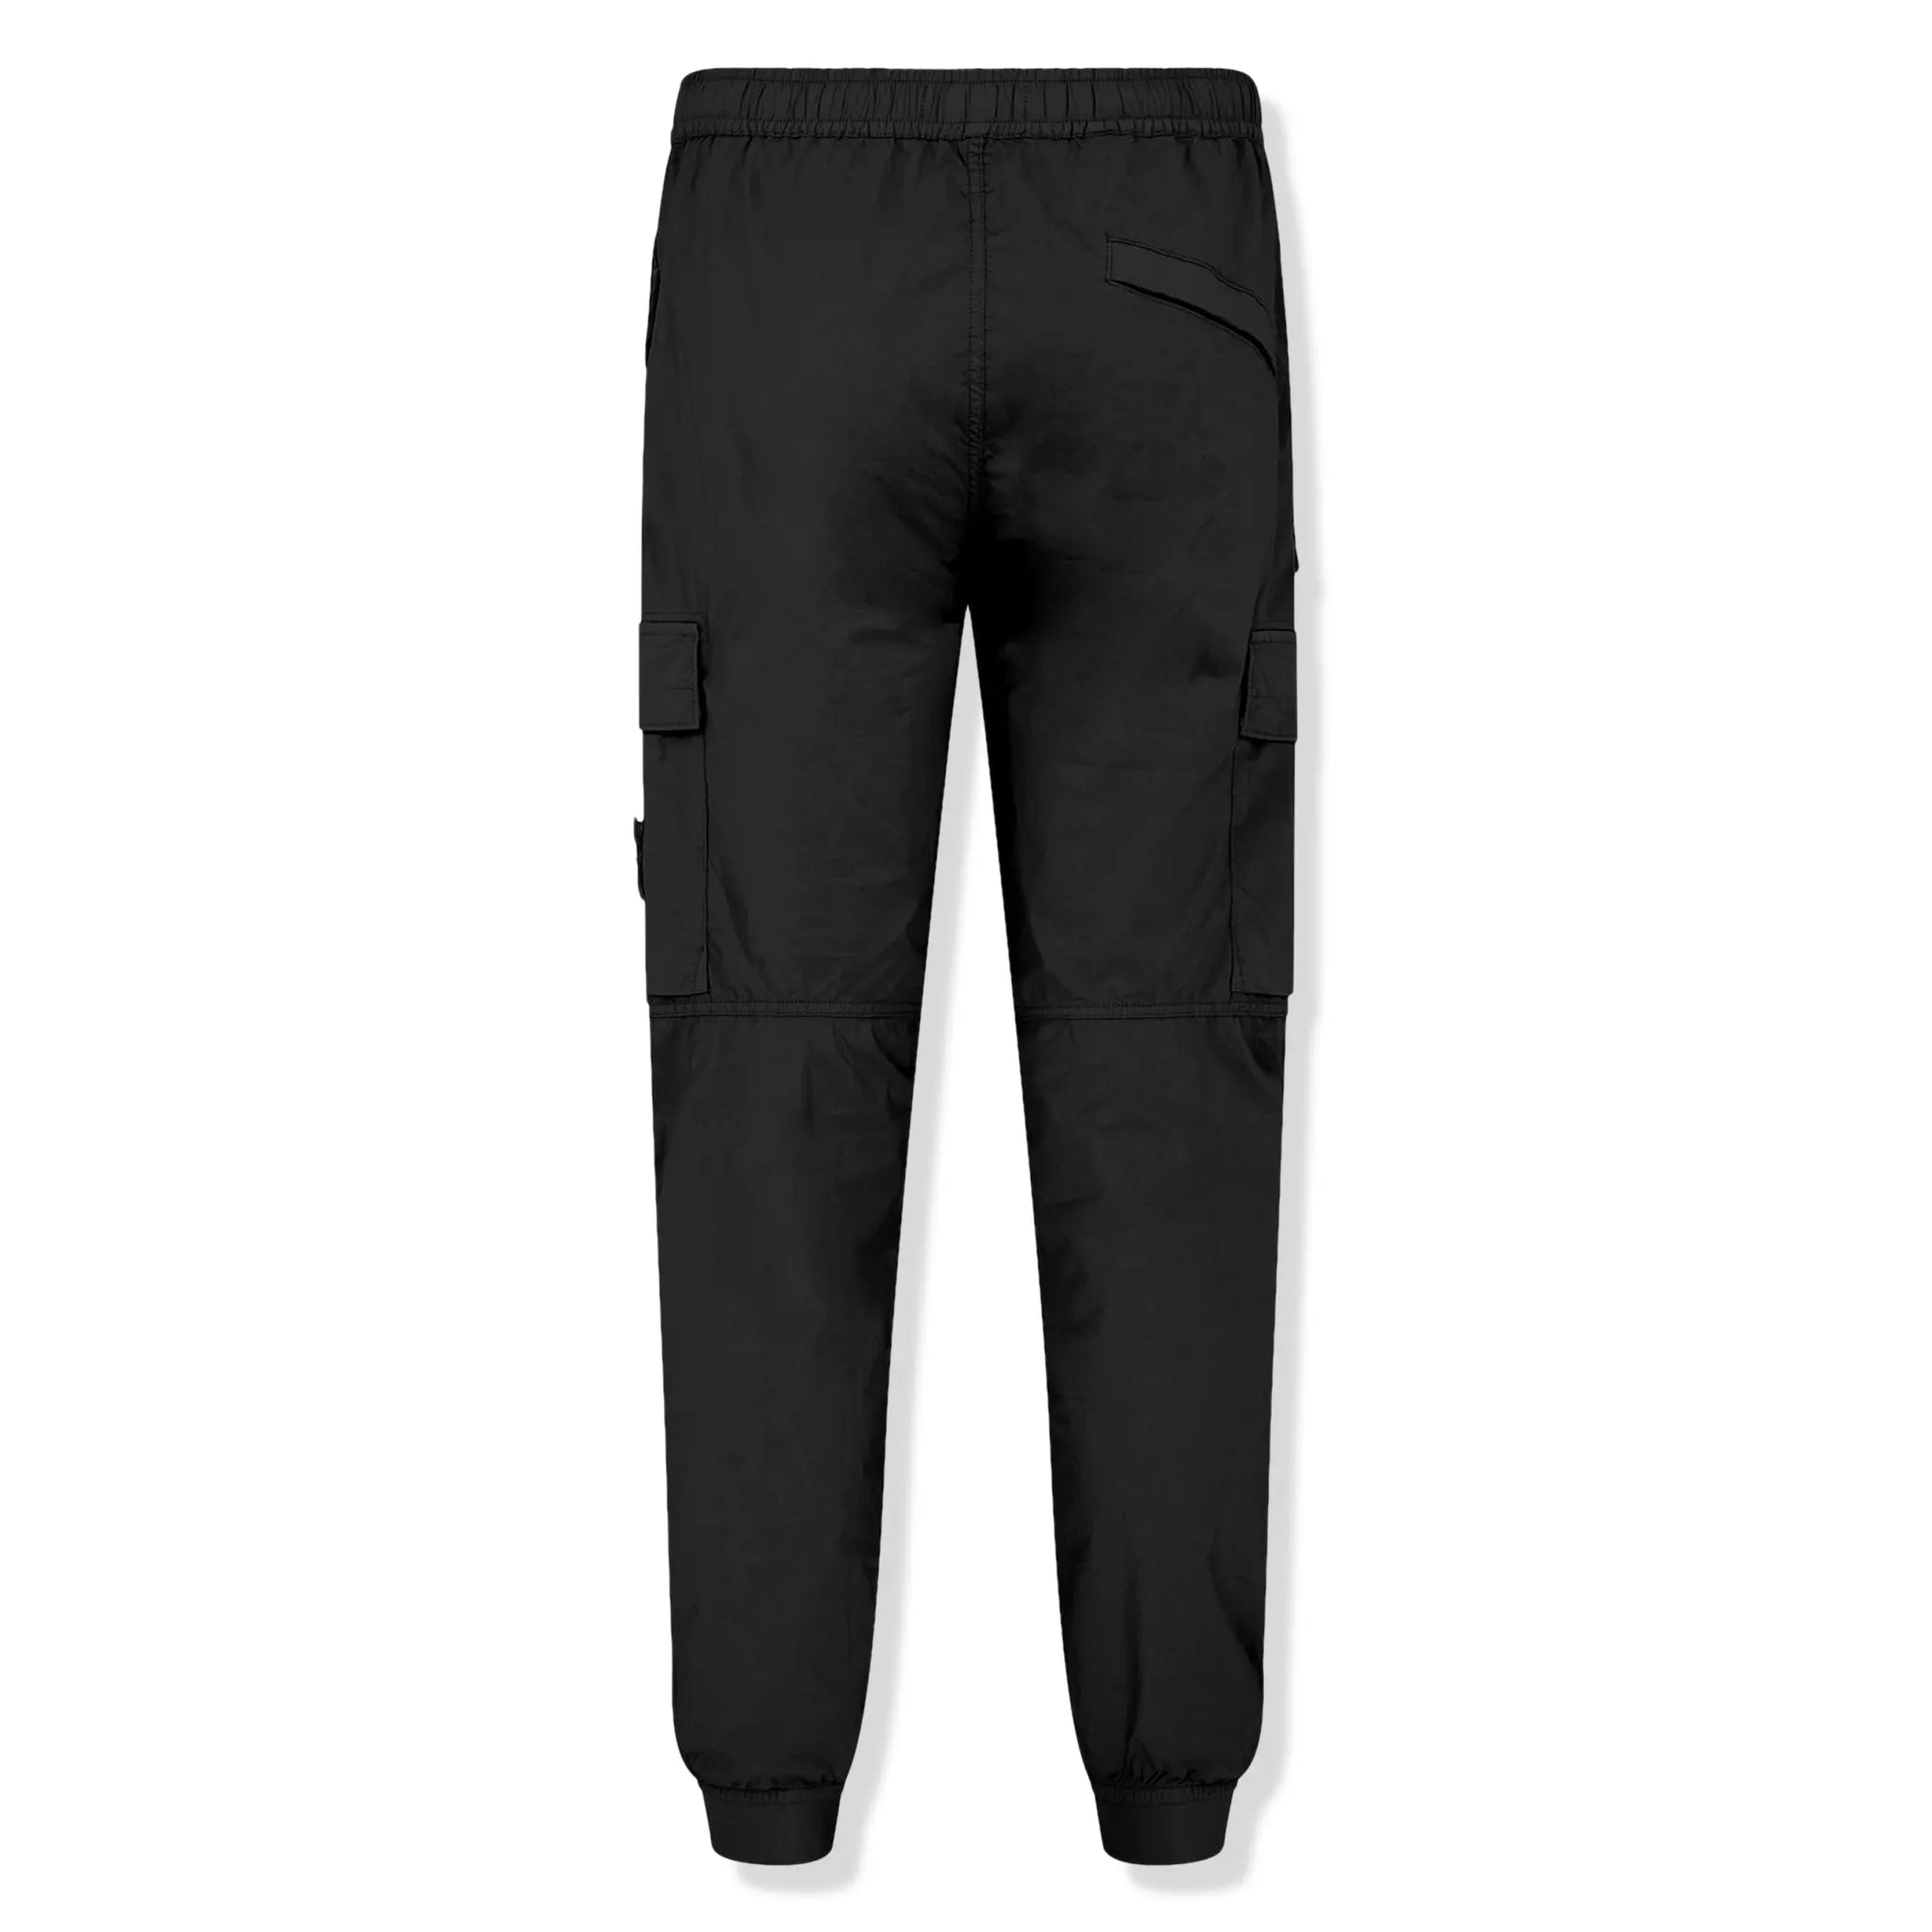 Back view of Stone Island Anthracite Grey Cargo Pants